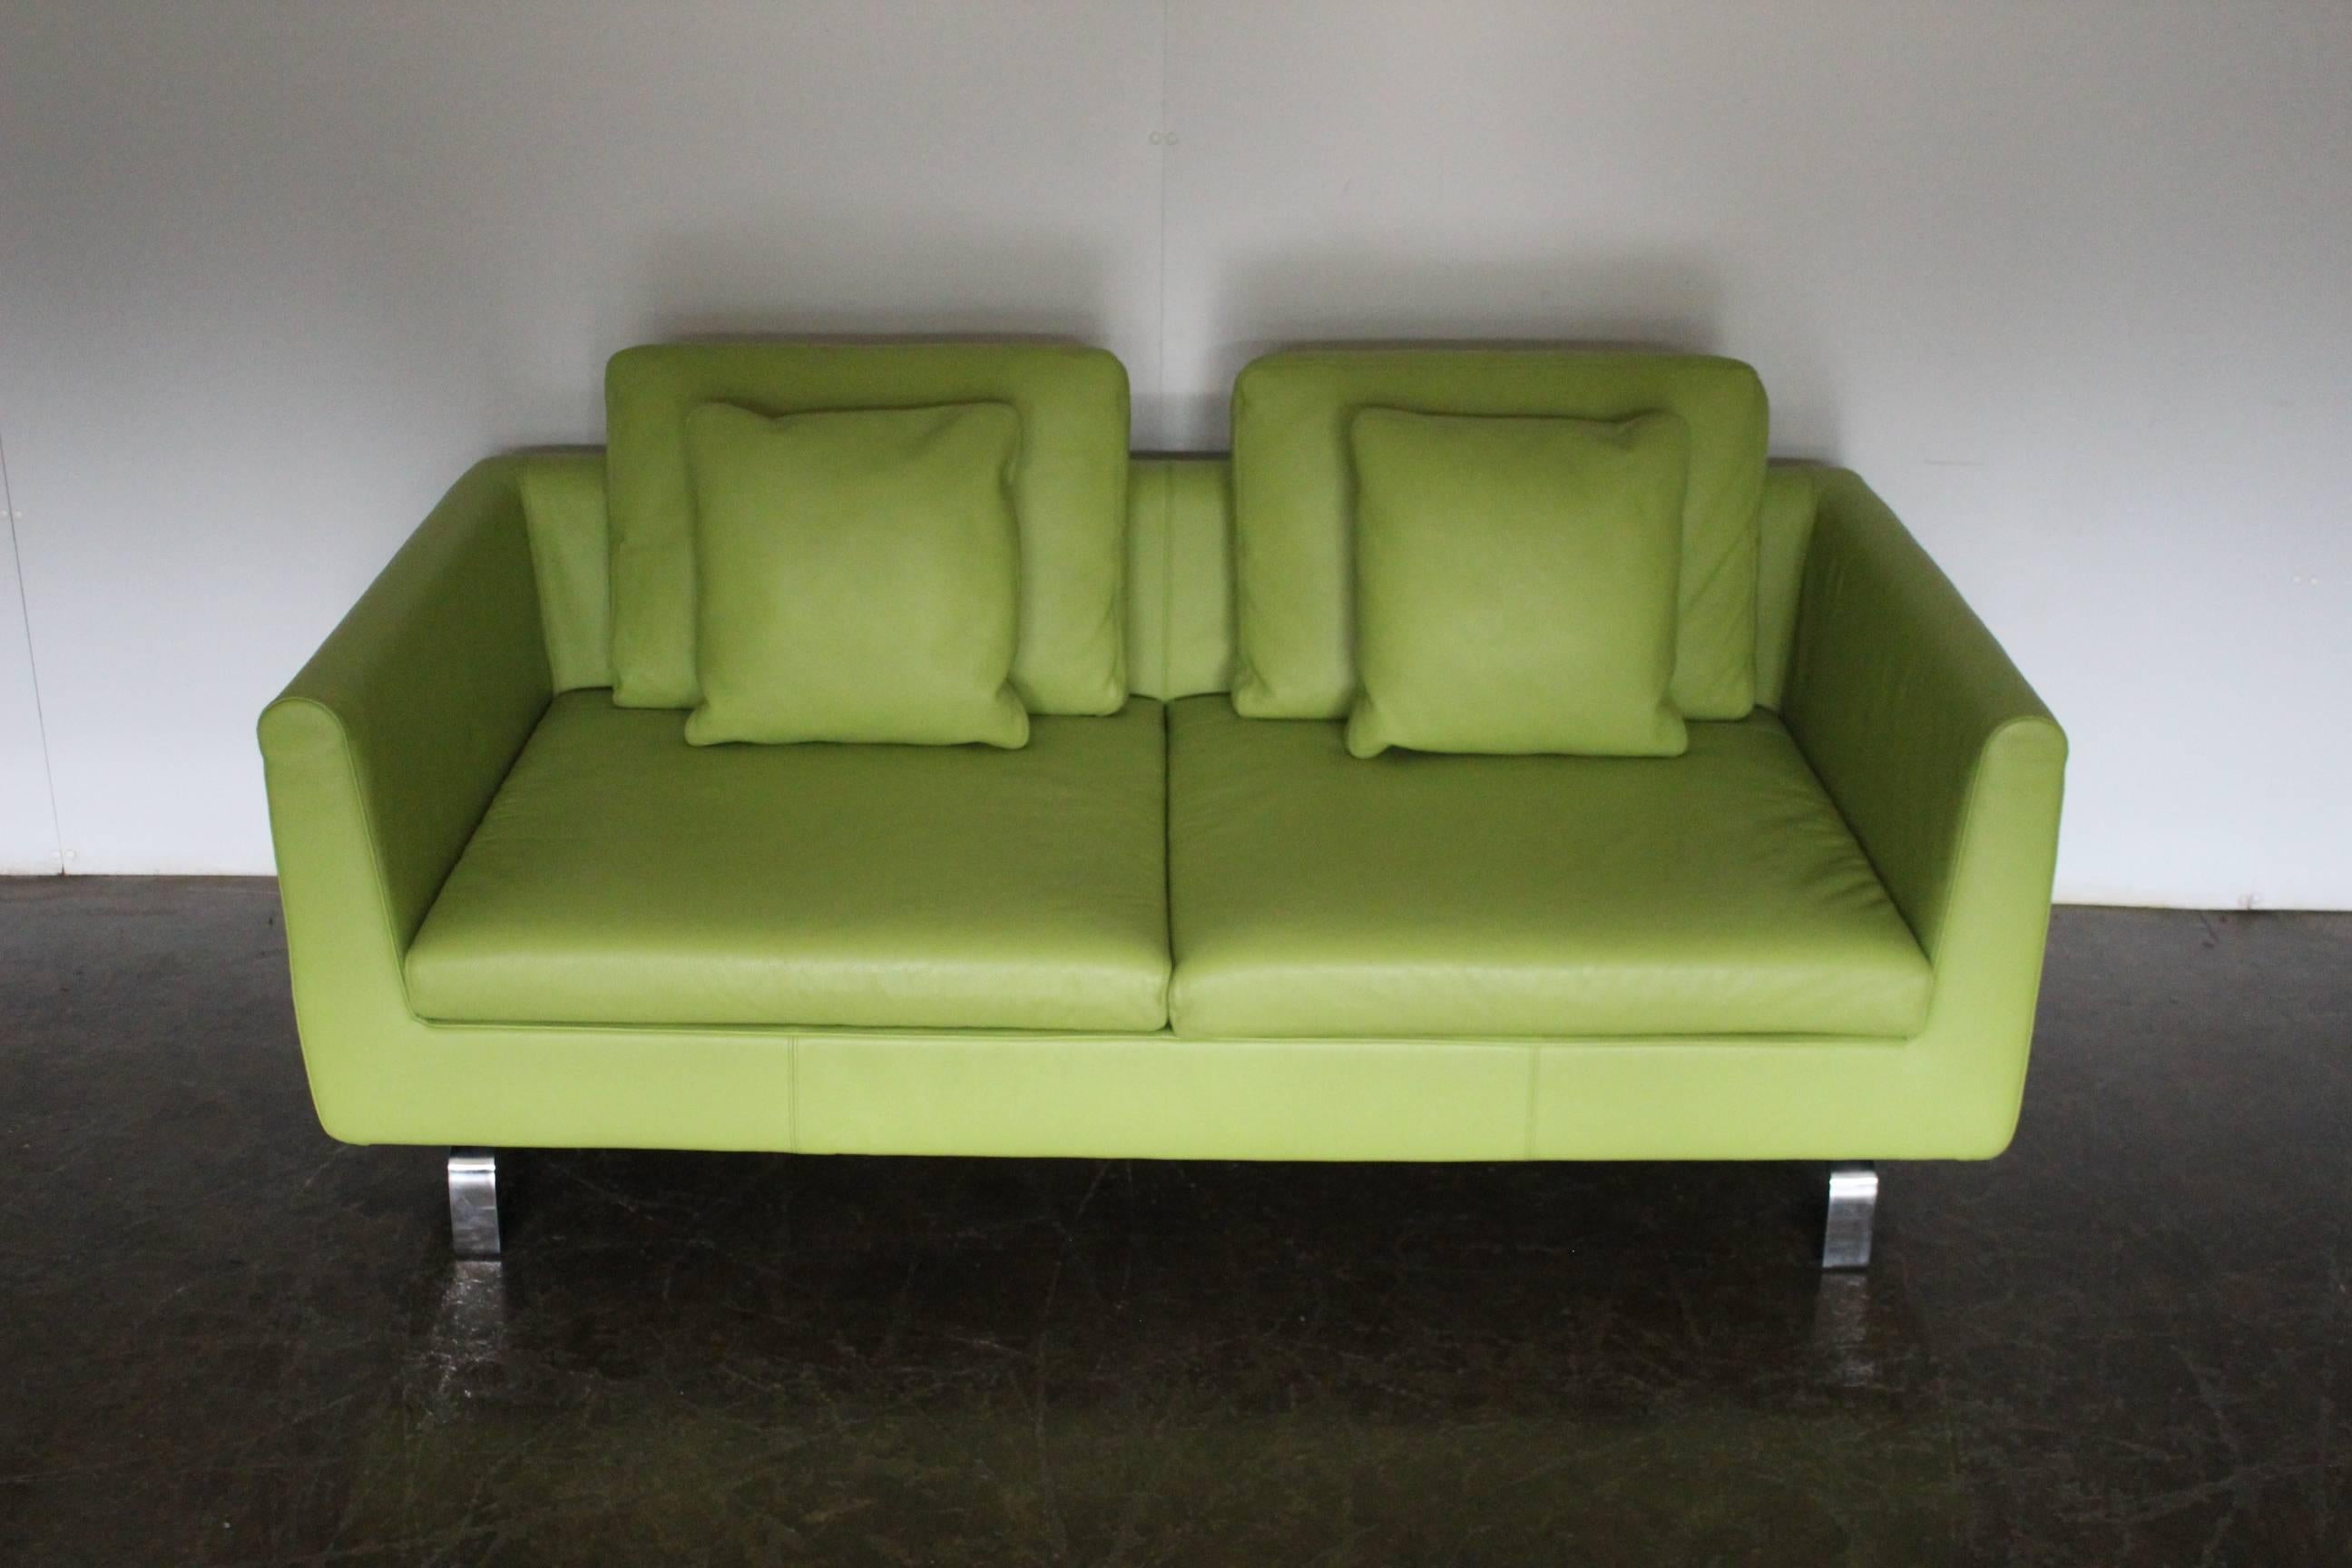 Metalwork Pair of Walter Knoll 2.5-Seat Sofa in Pristine Lime-Green “Pelle” Leather